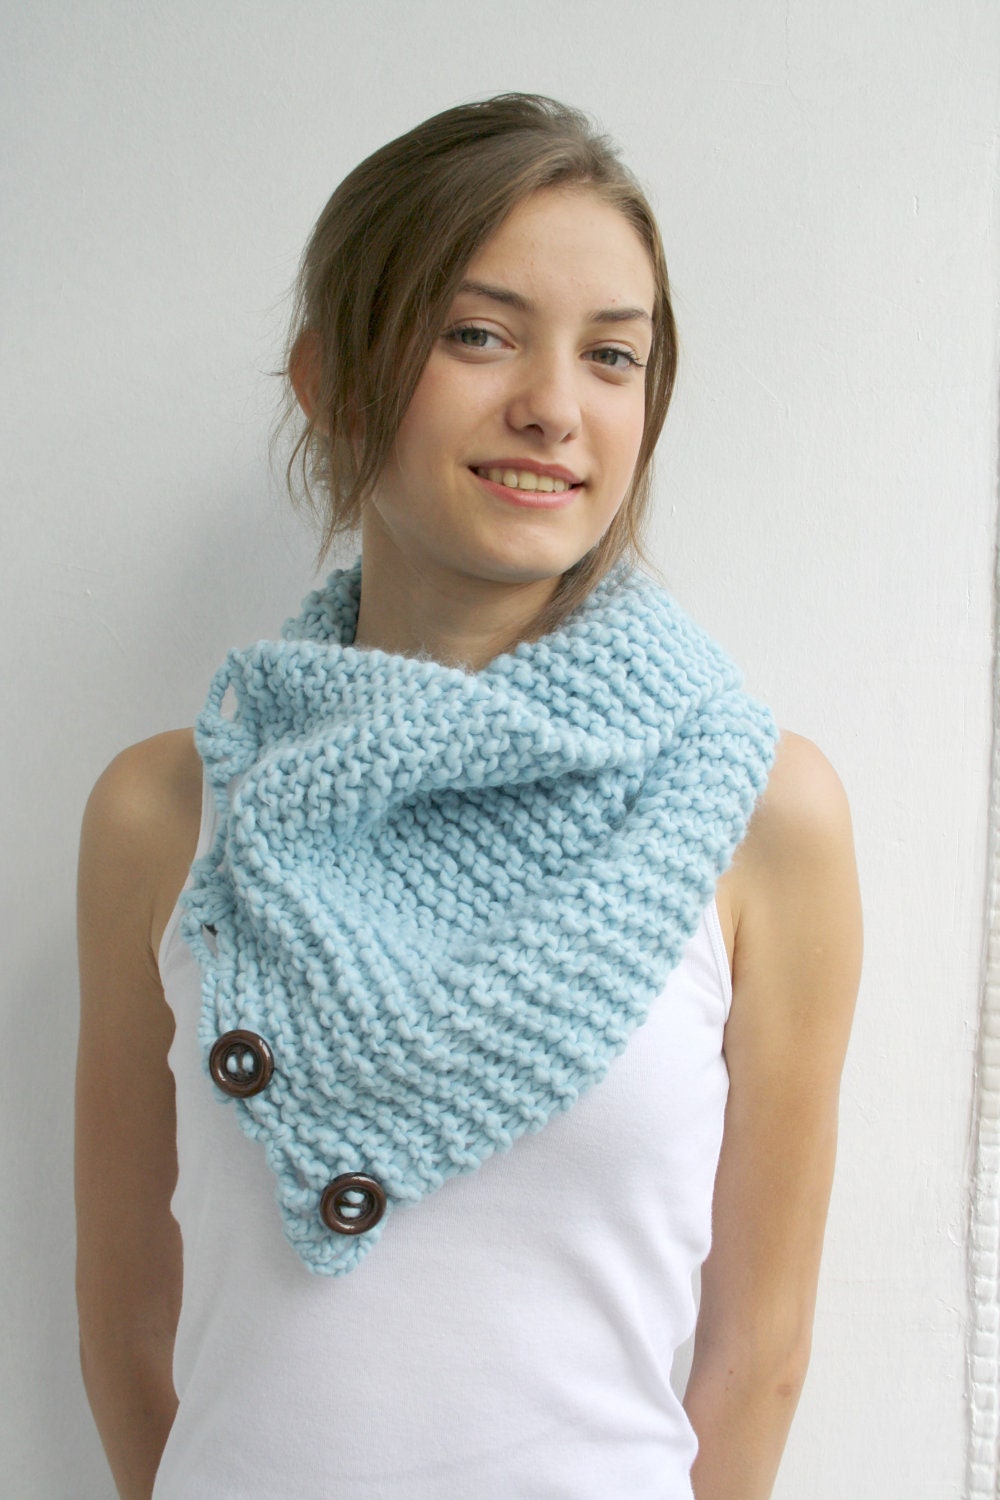 Blue Scarf Shawl Neckwarmer Cowl Mothers Day gift for women